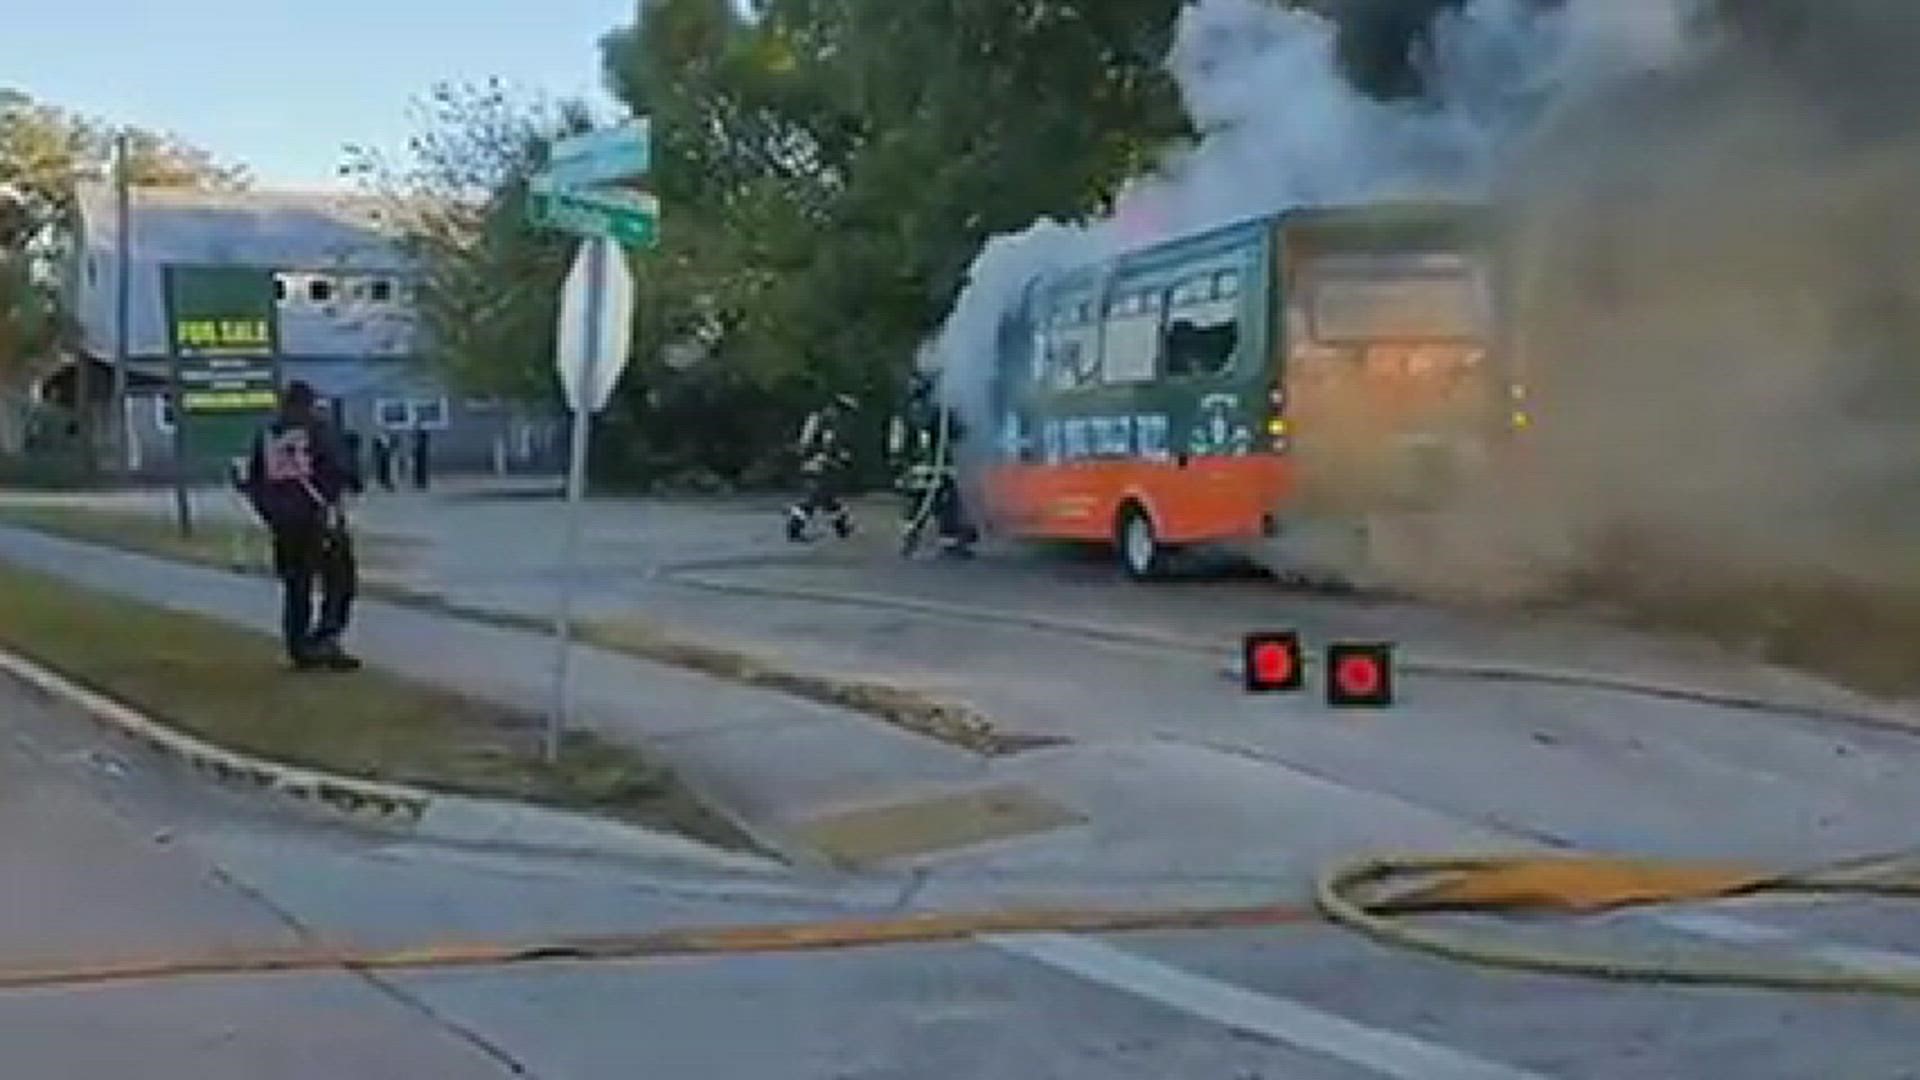 Crews are currently on scene of a bus fire at N Ponce and Rhode Avenue, expect traffic delays in the area.